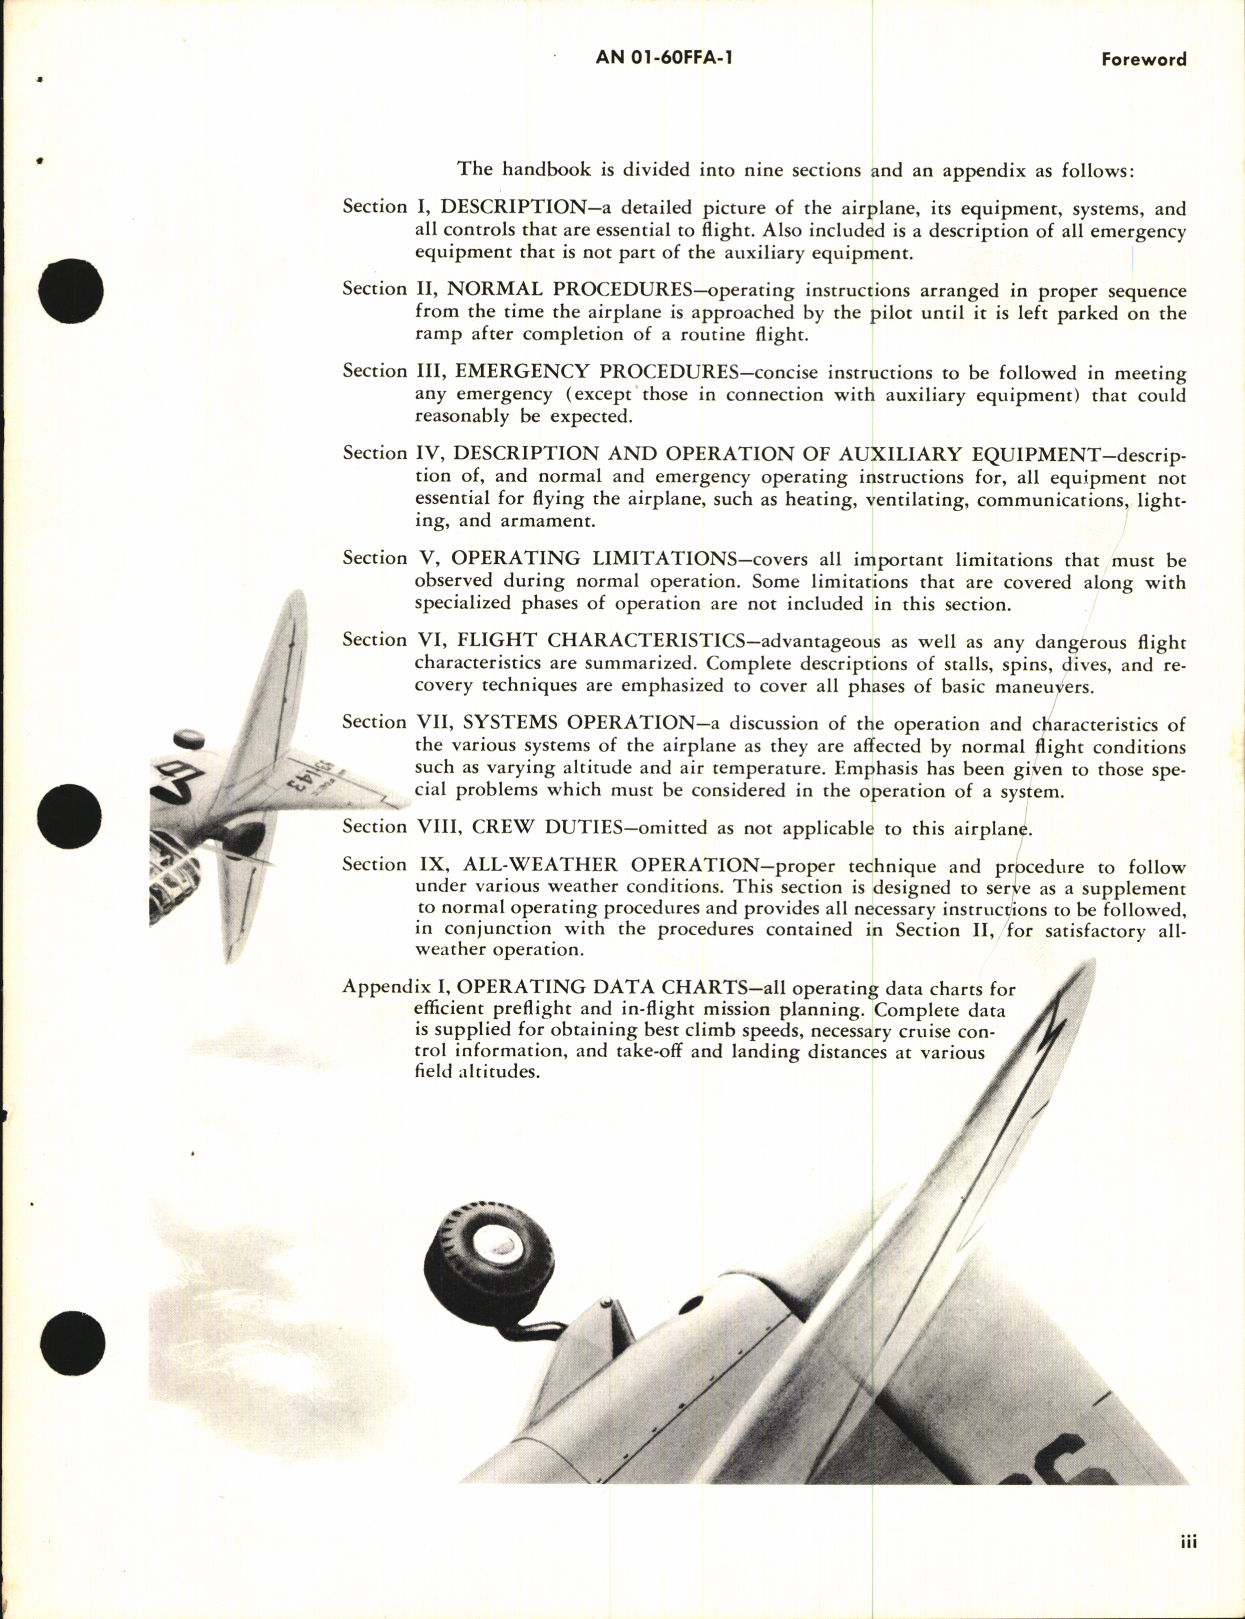 Sample page 5 from AirCorps Library document: Flight Handbook for T-6G